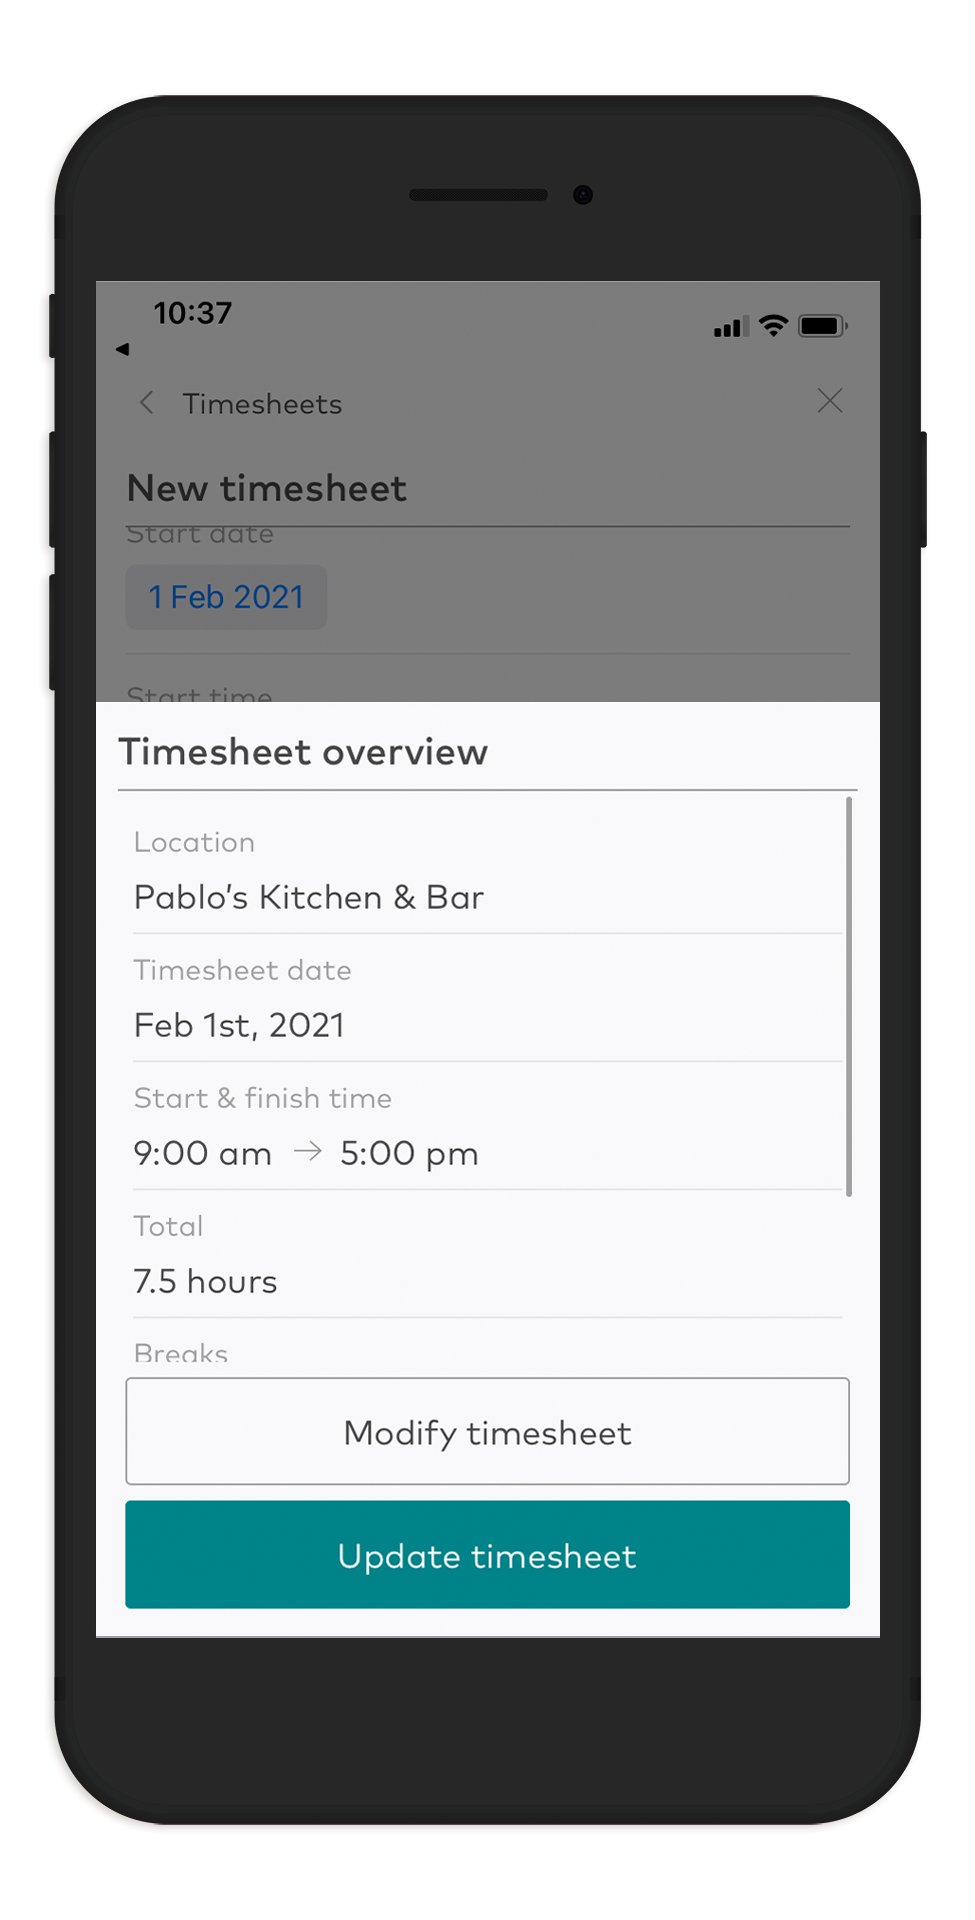 timesheets_mobile_app_update_timesheet.png